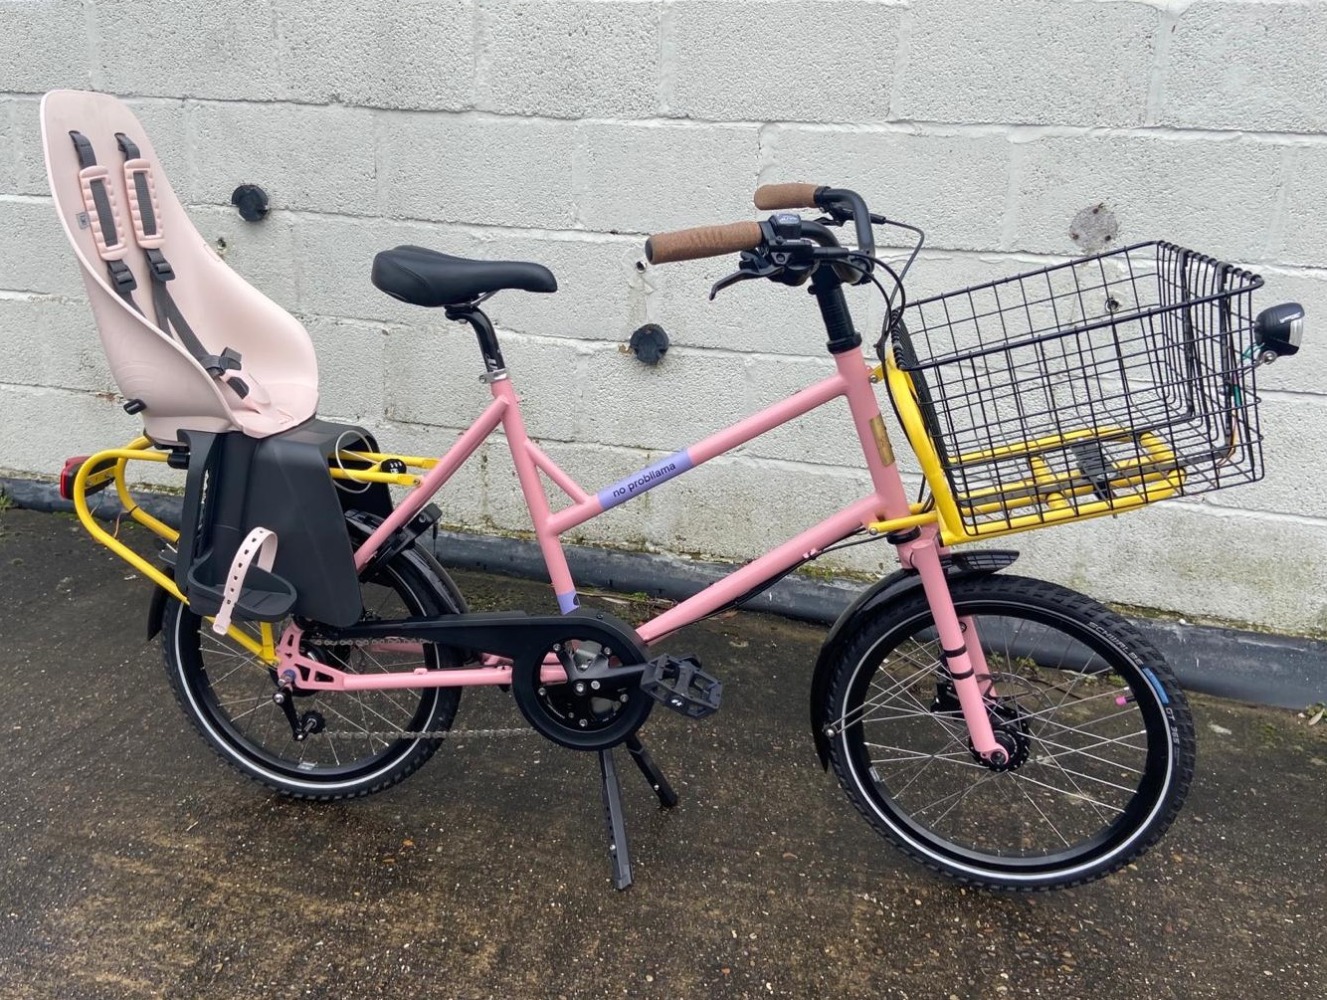 Cycling in Ramadan - Sarah Jasat's pink Flux Probllama utility bike with a large front basket and rear child seat